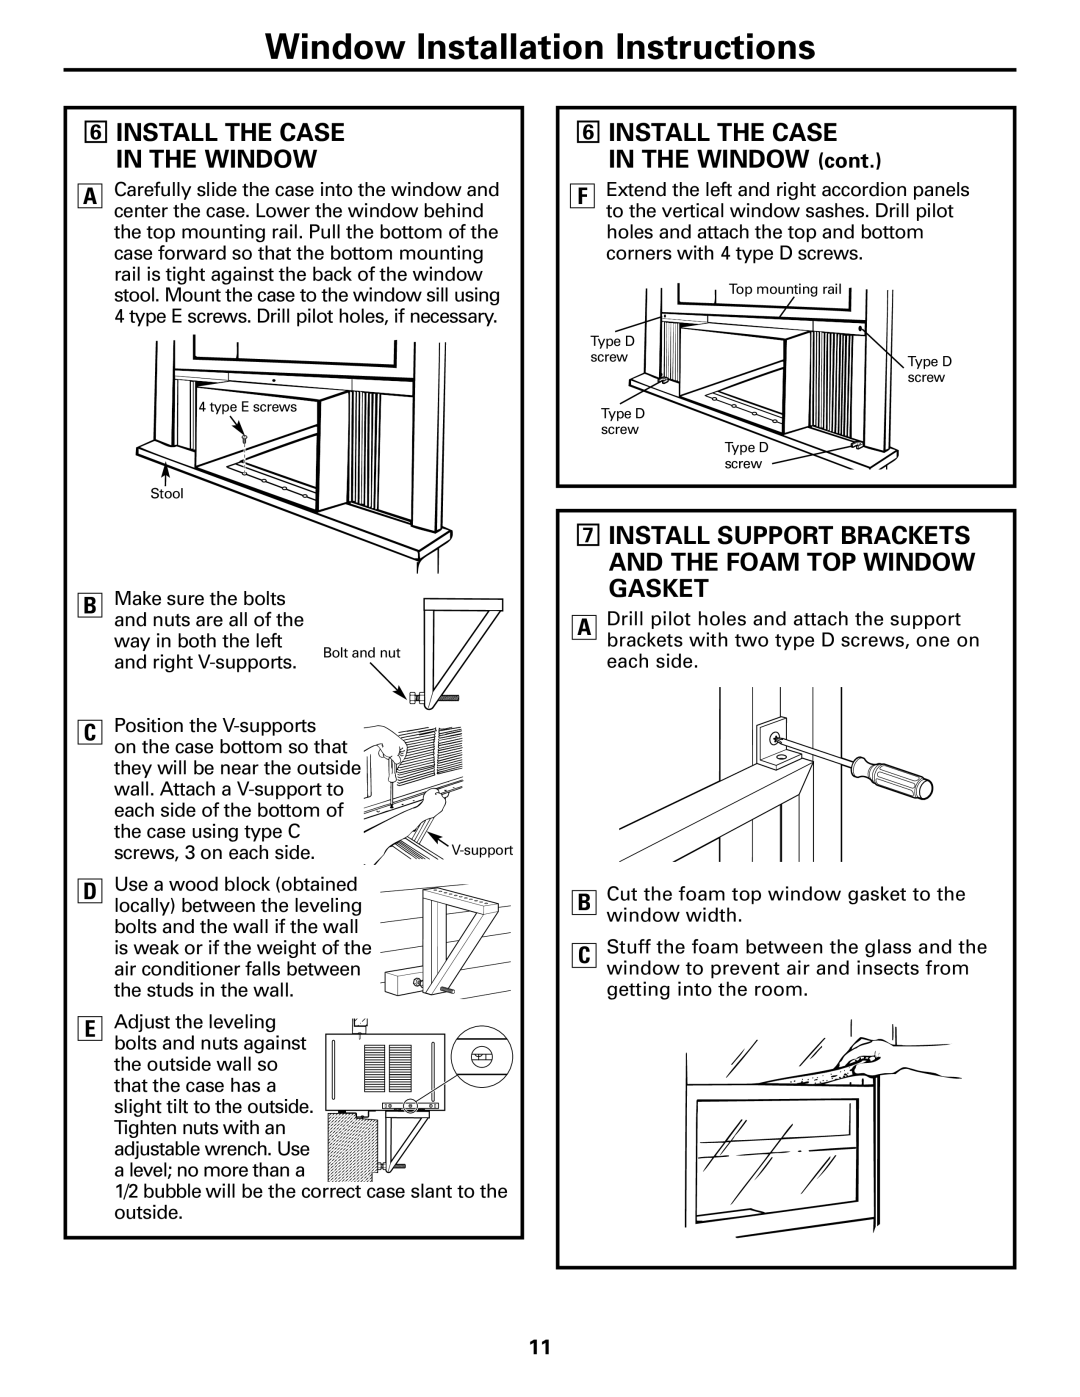 GE Monogram AEE18 installation instructions 6INSTALL THE CASE IN THE WINDOW cont, Window Installation Instructions 